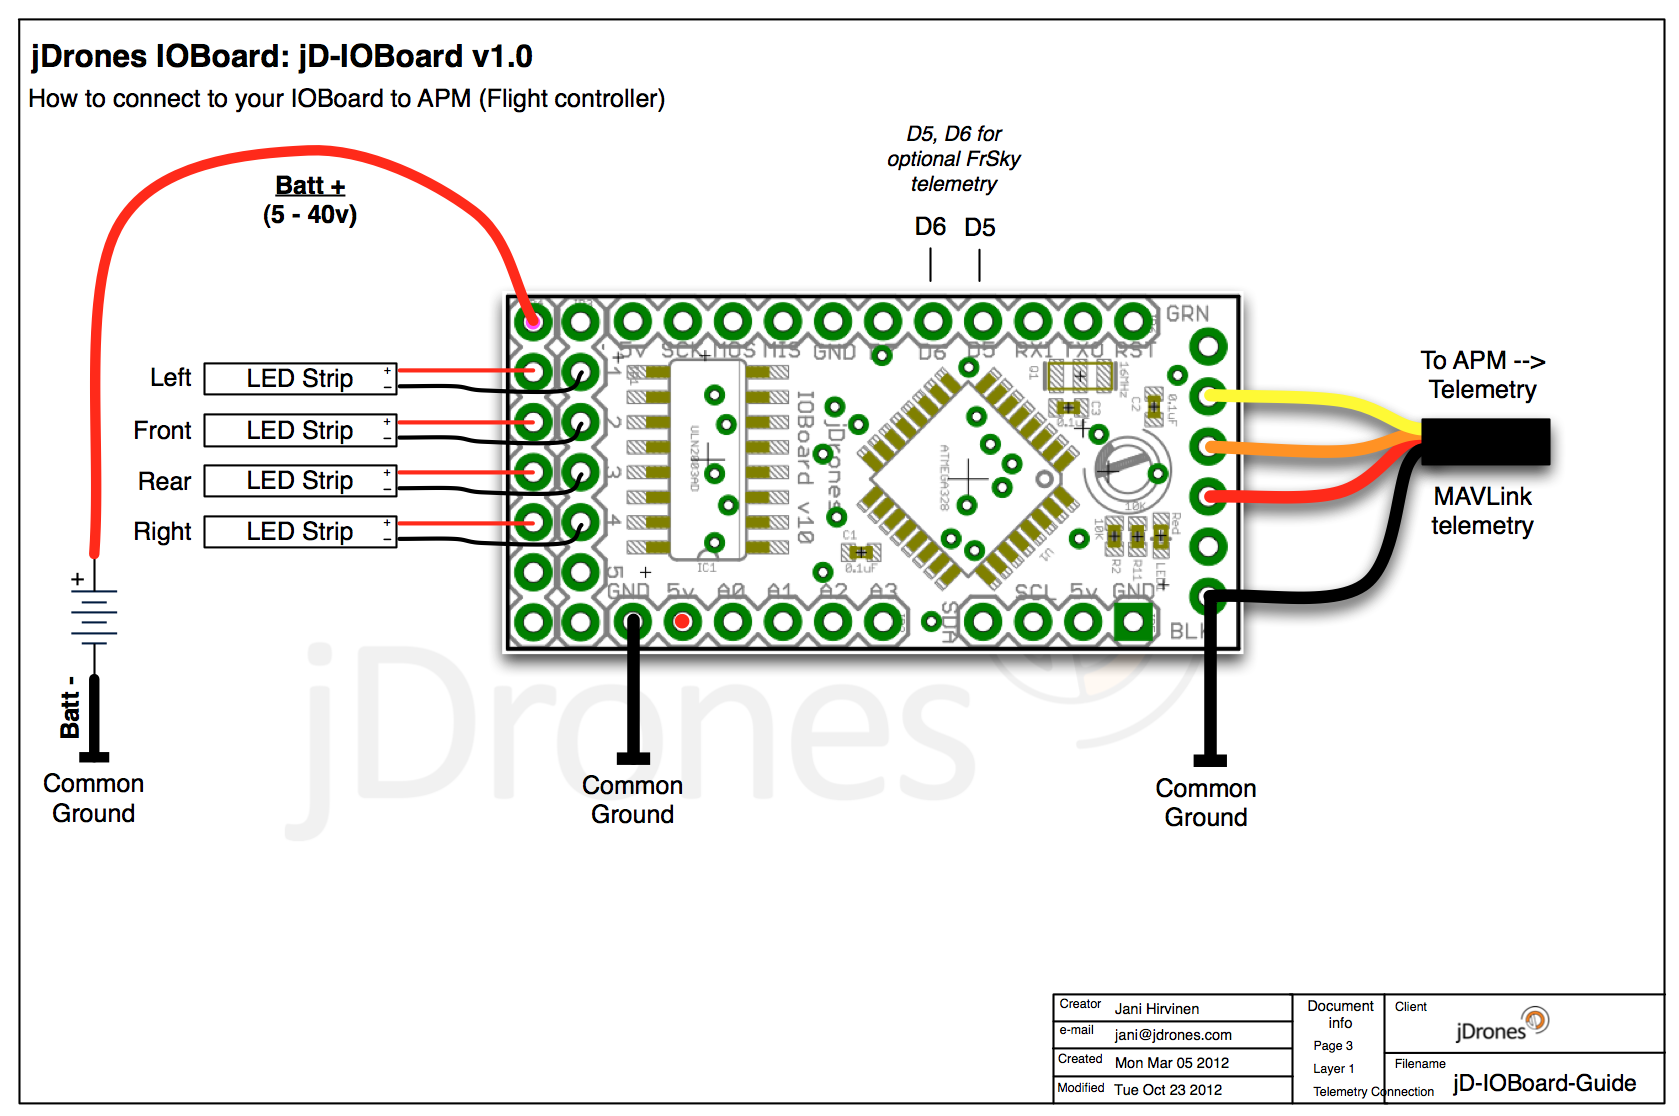 jD-IOBoard-TelemConnection.png?width=500